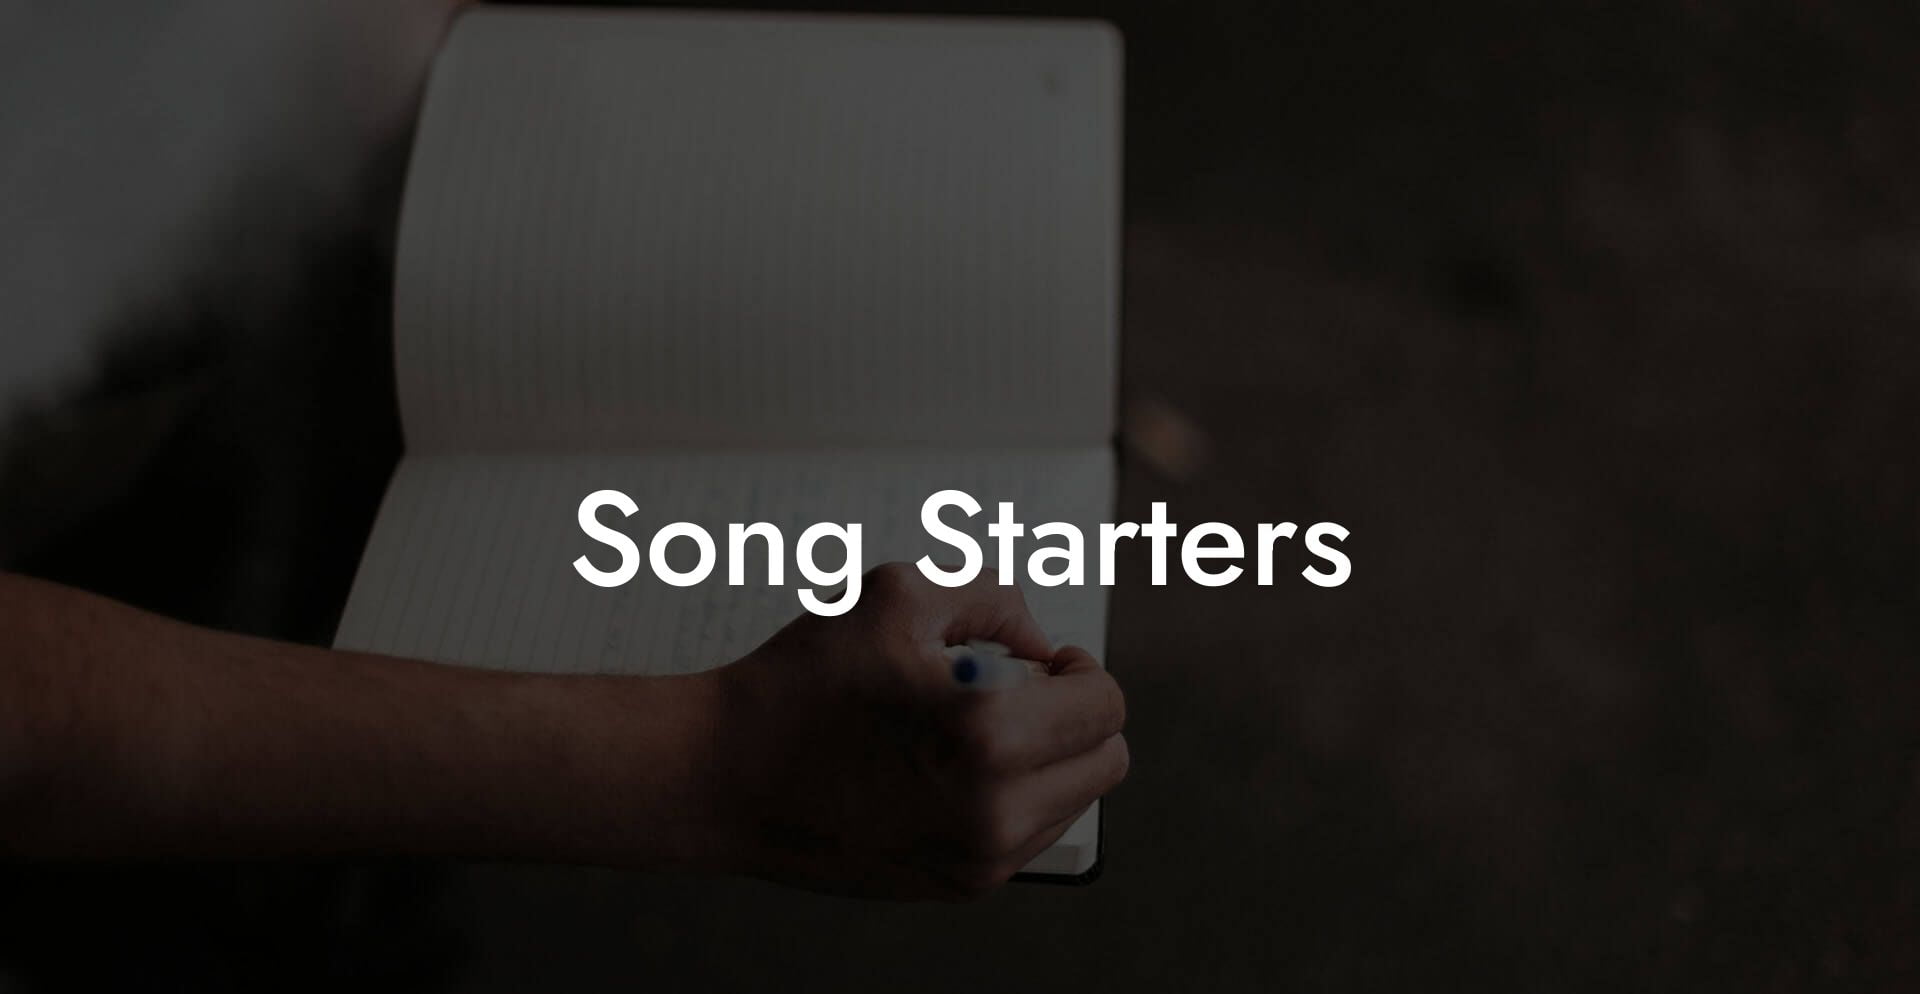 song starters lyric assistant